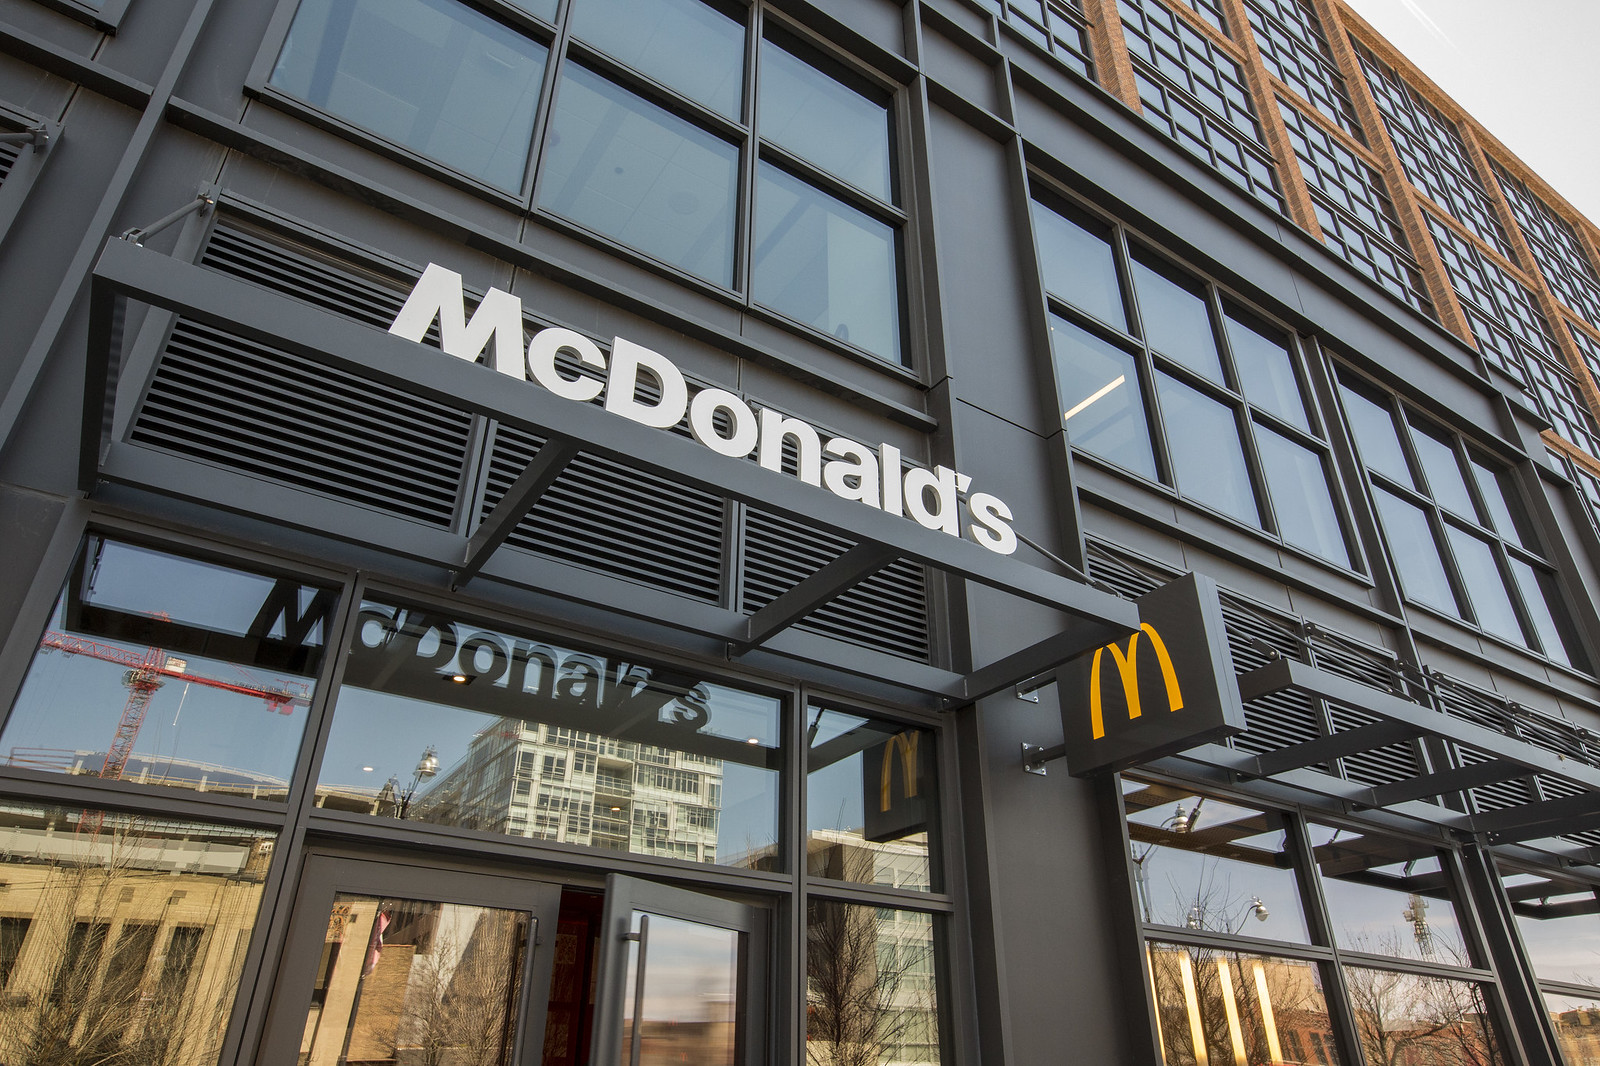 The outside of a business building with windows and the words “McDonald’s.”